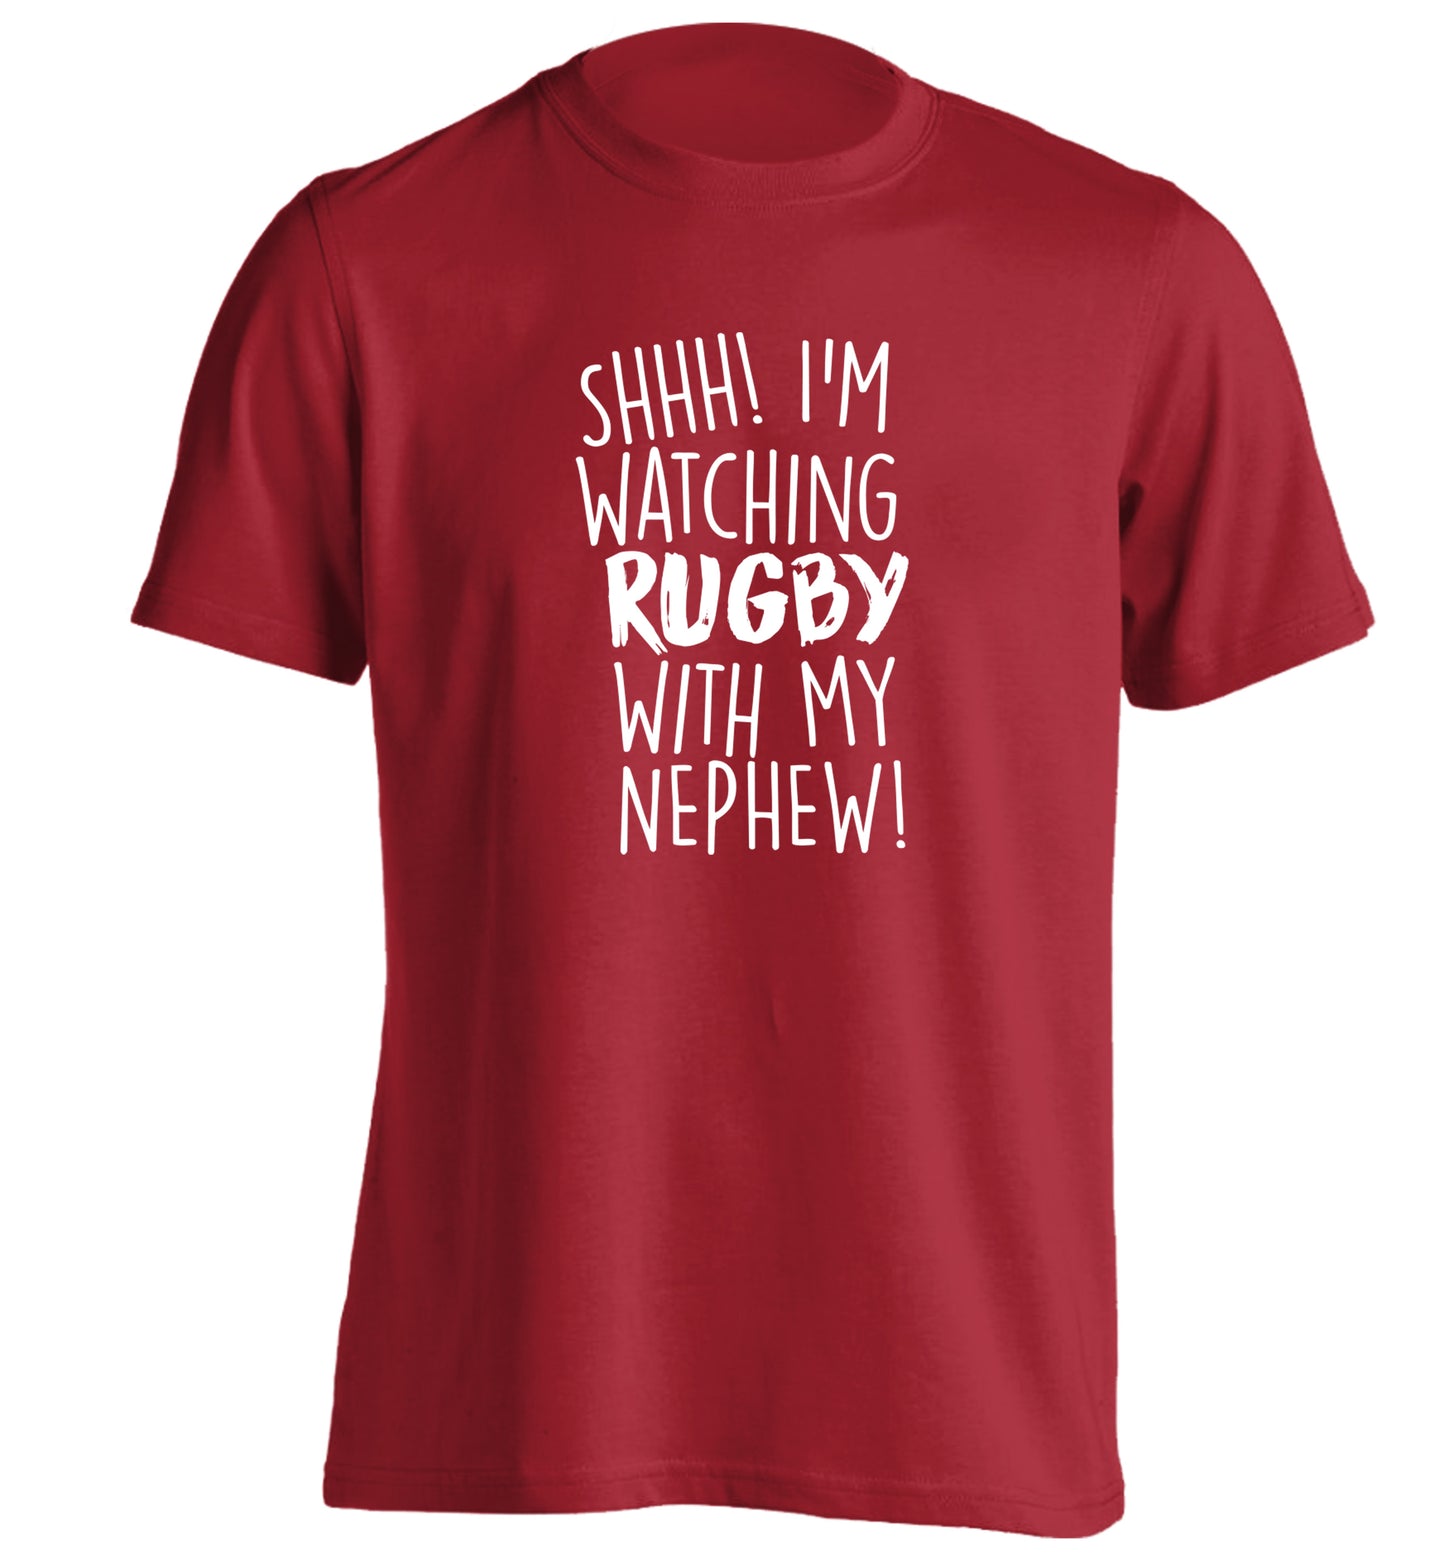 Shh.. I'm watching rugby with my nephew adults unisex red Tshirt 2XL